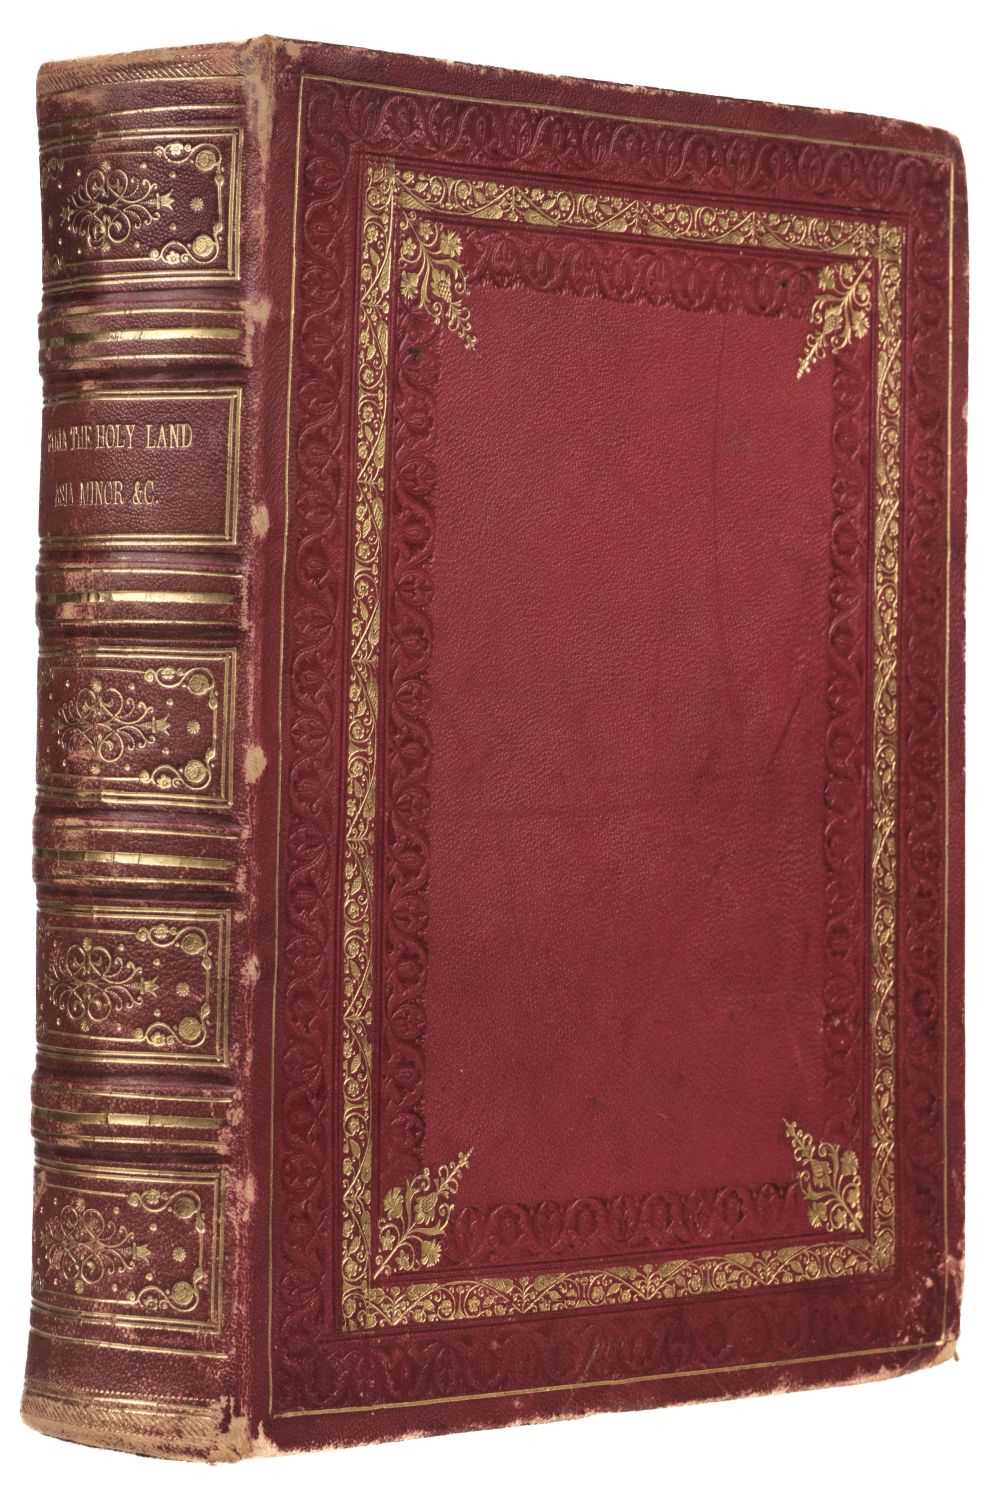 Lot 7 - Carne (John). Syria, The Holy Land, Asia Minor, 3 volumes bound in 1, 1st edition, London: 1836-38